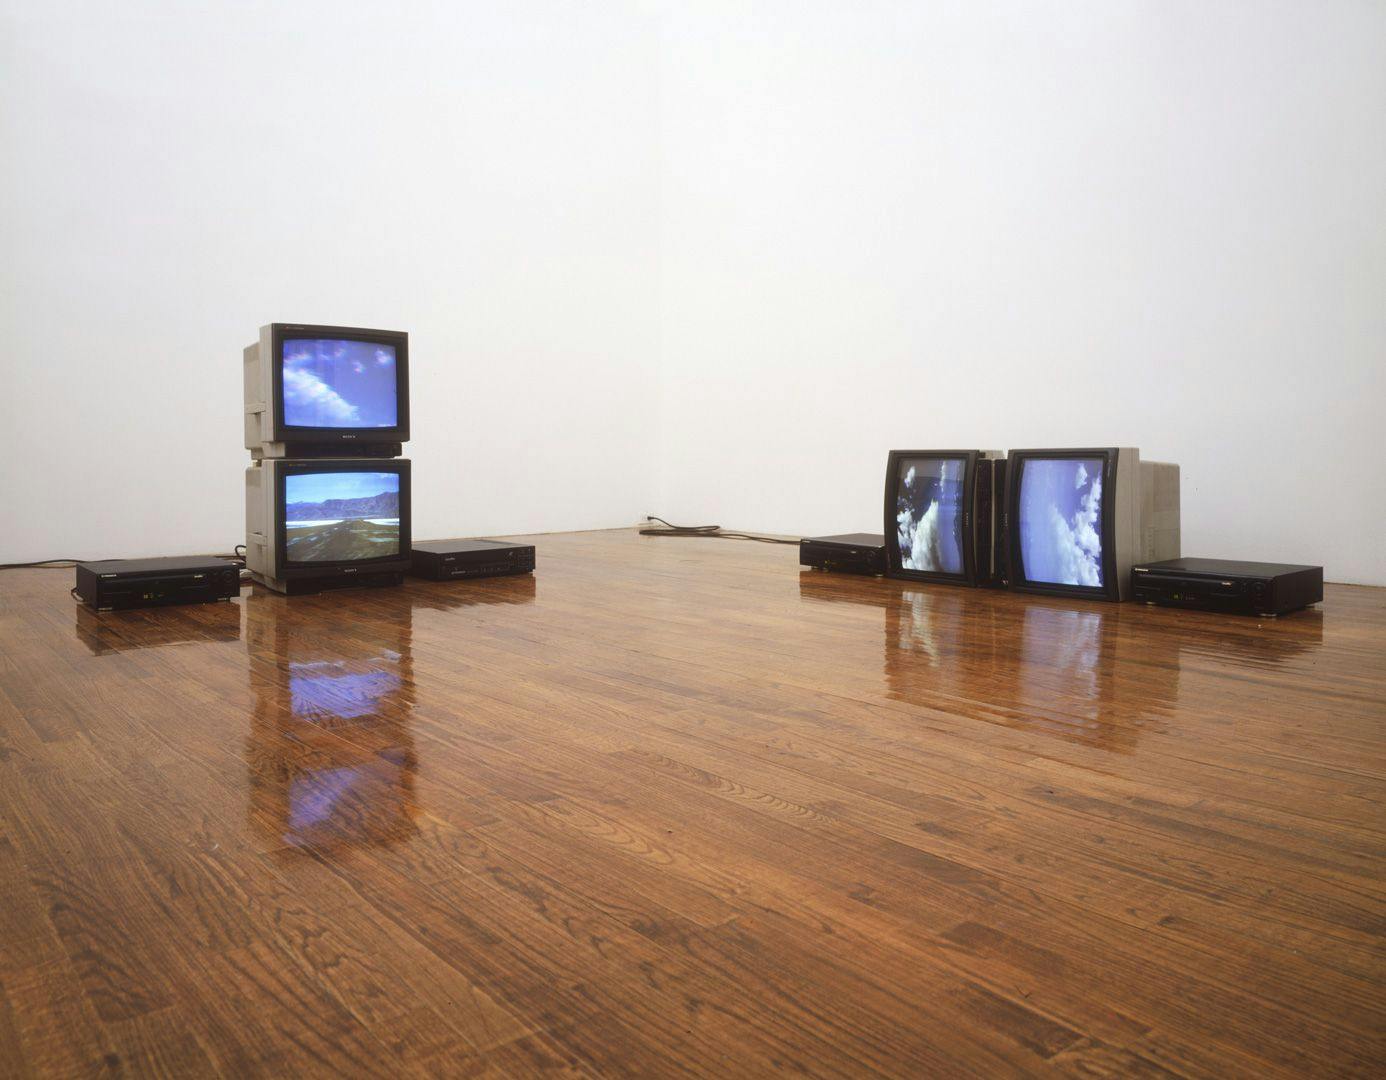 Installation view of two sculptures in the exhibition titled Five Years 1993 to 1998.